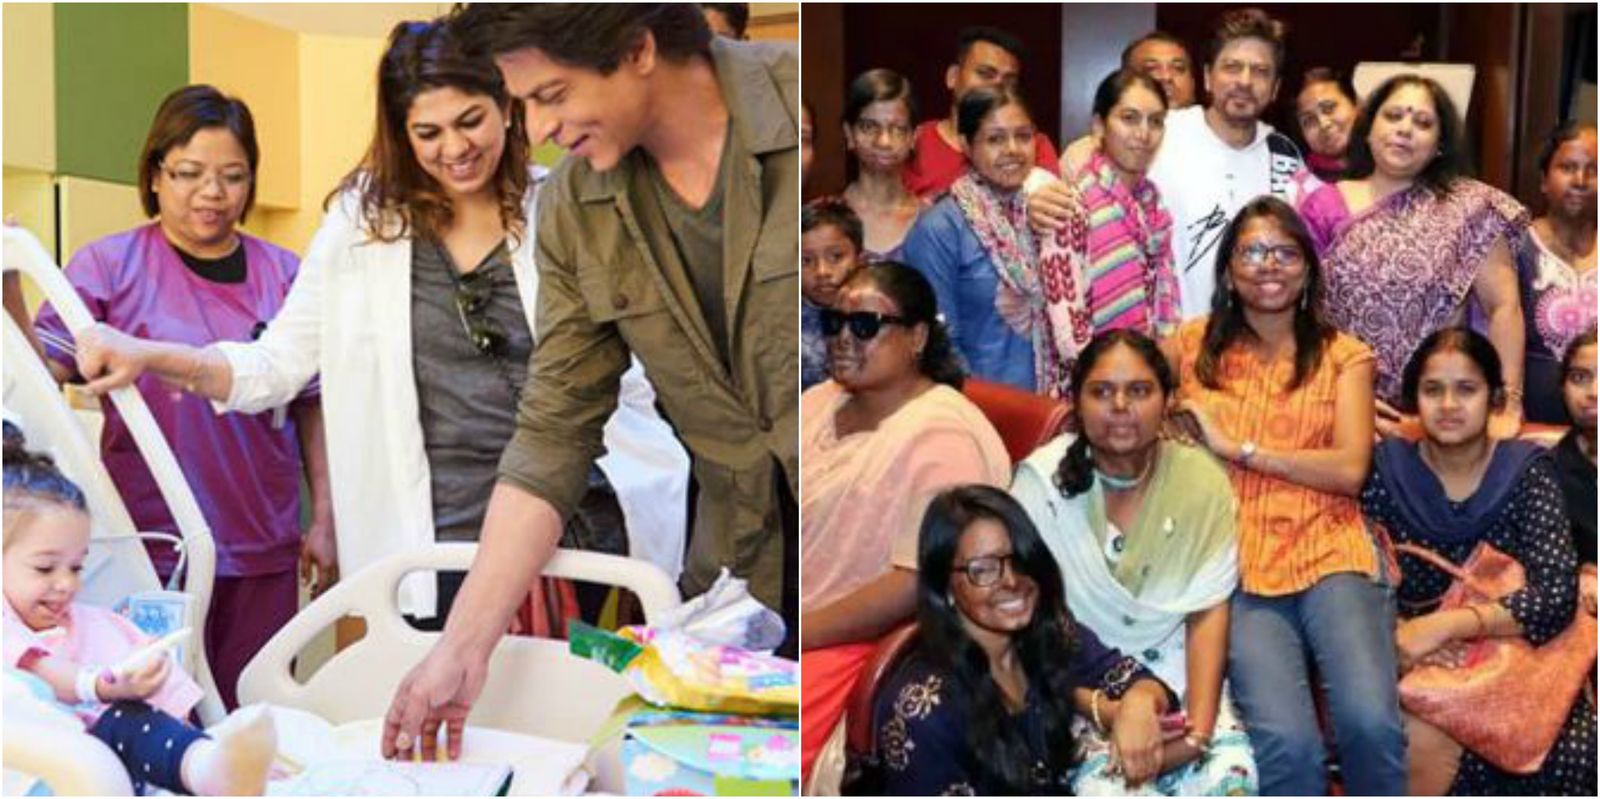 This Charitable Side Of Shah Rukh Is Something That Even His Biggest Fans Would Not Know About